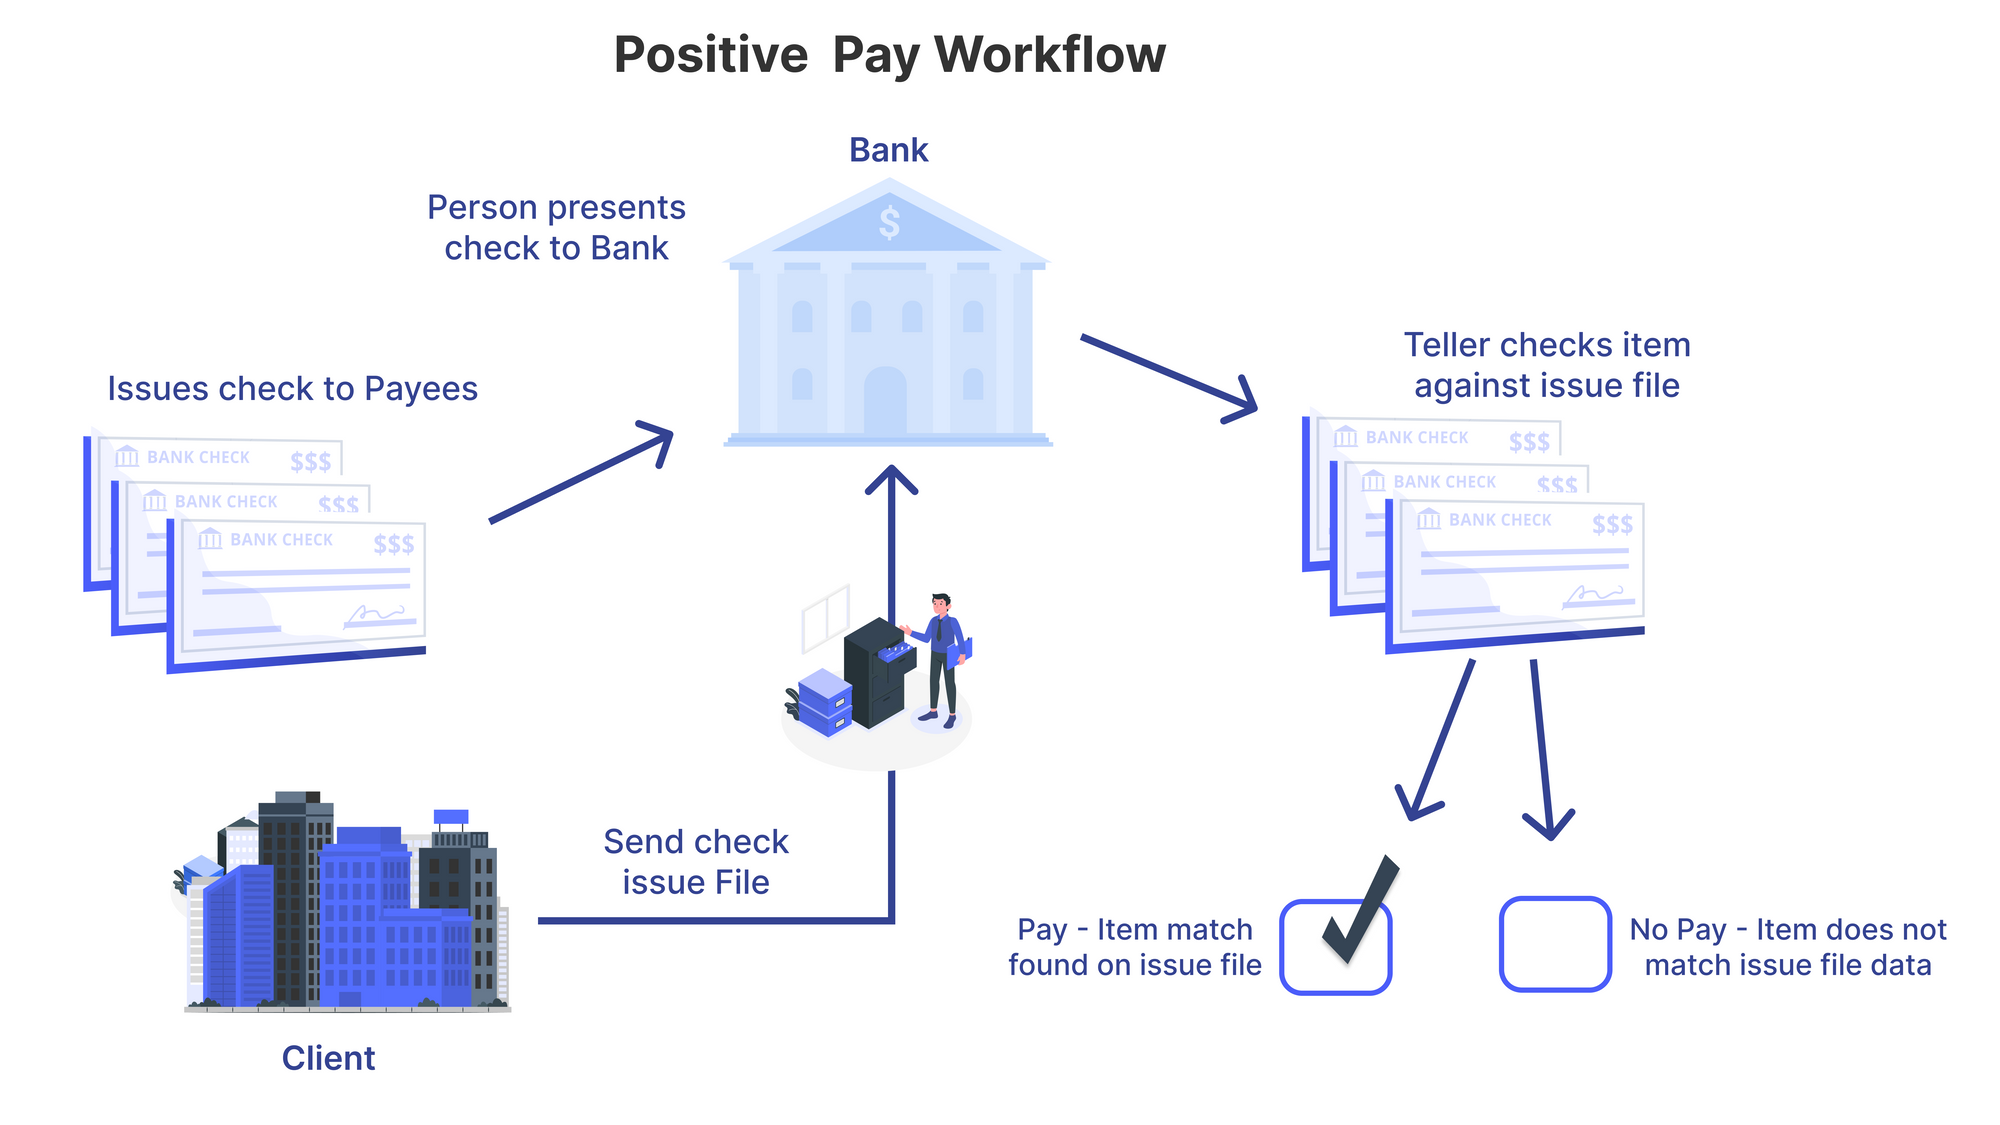 Positive Pay Workflow